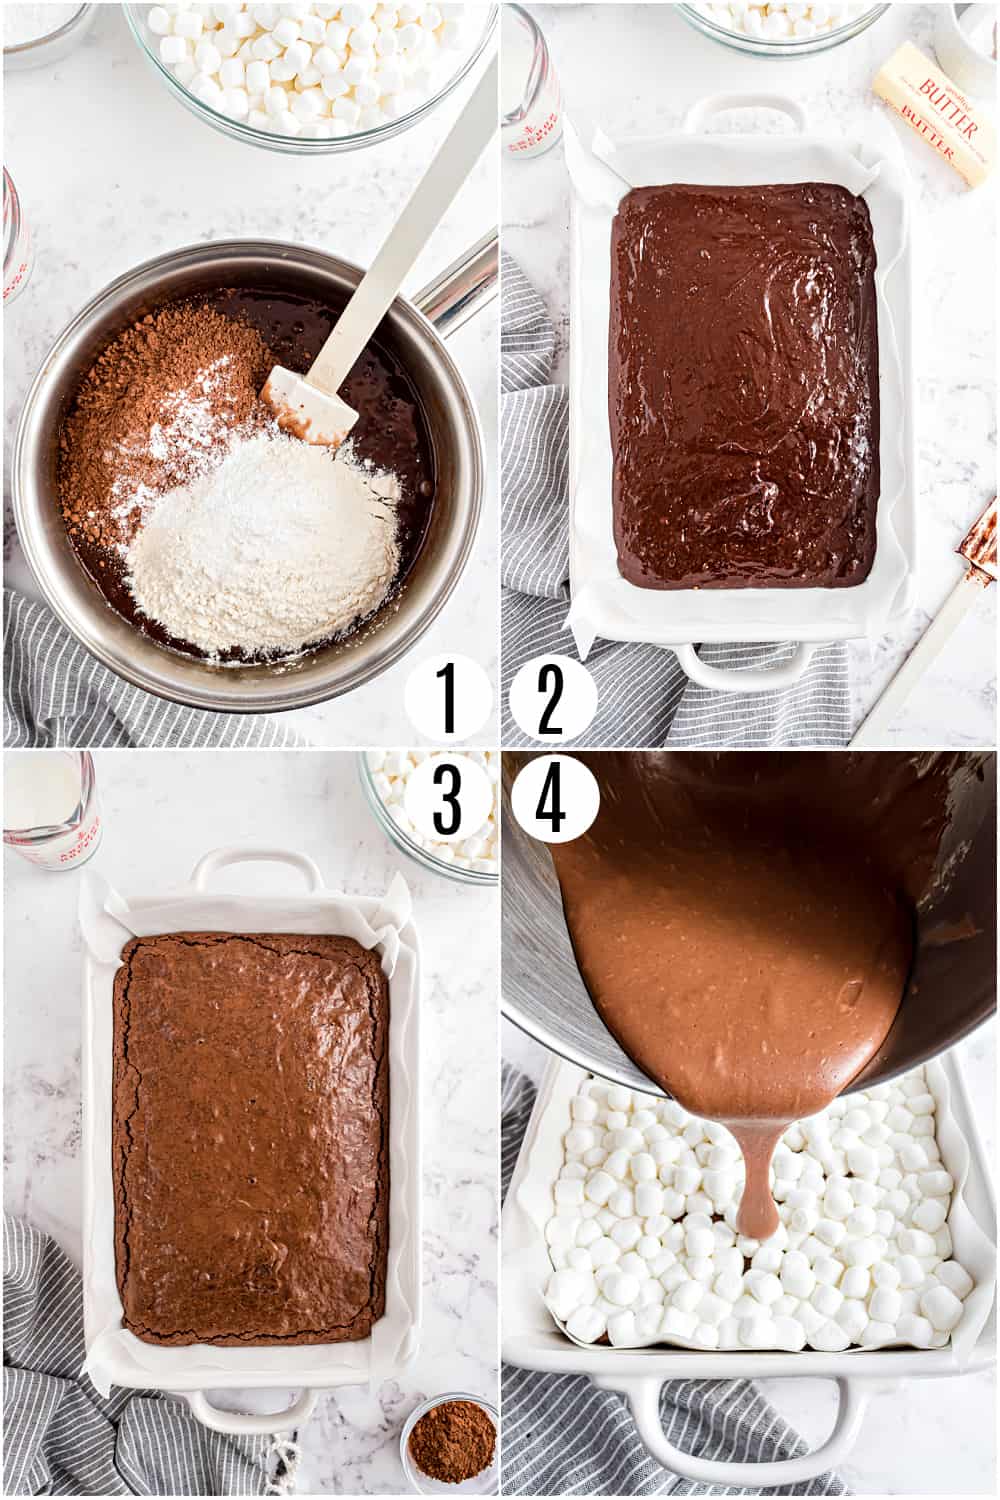 Step by step photos showing how to make marshmallow brownies.